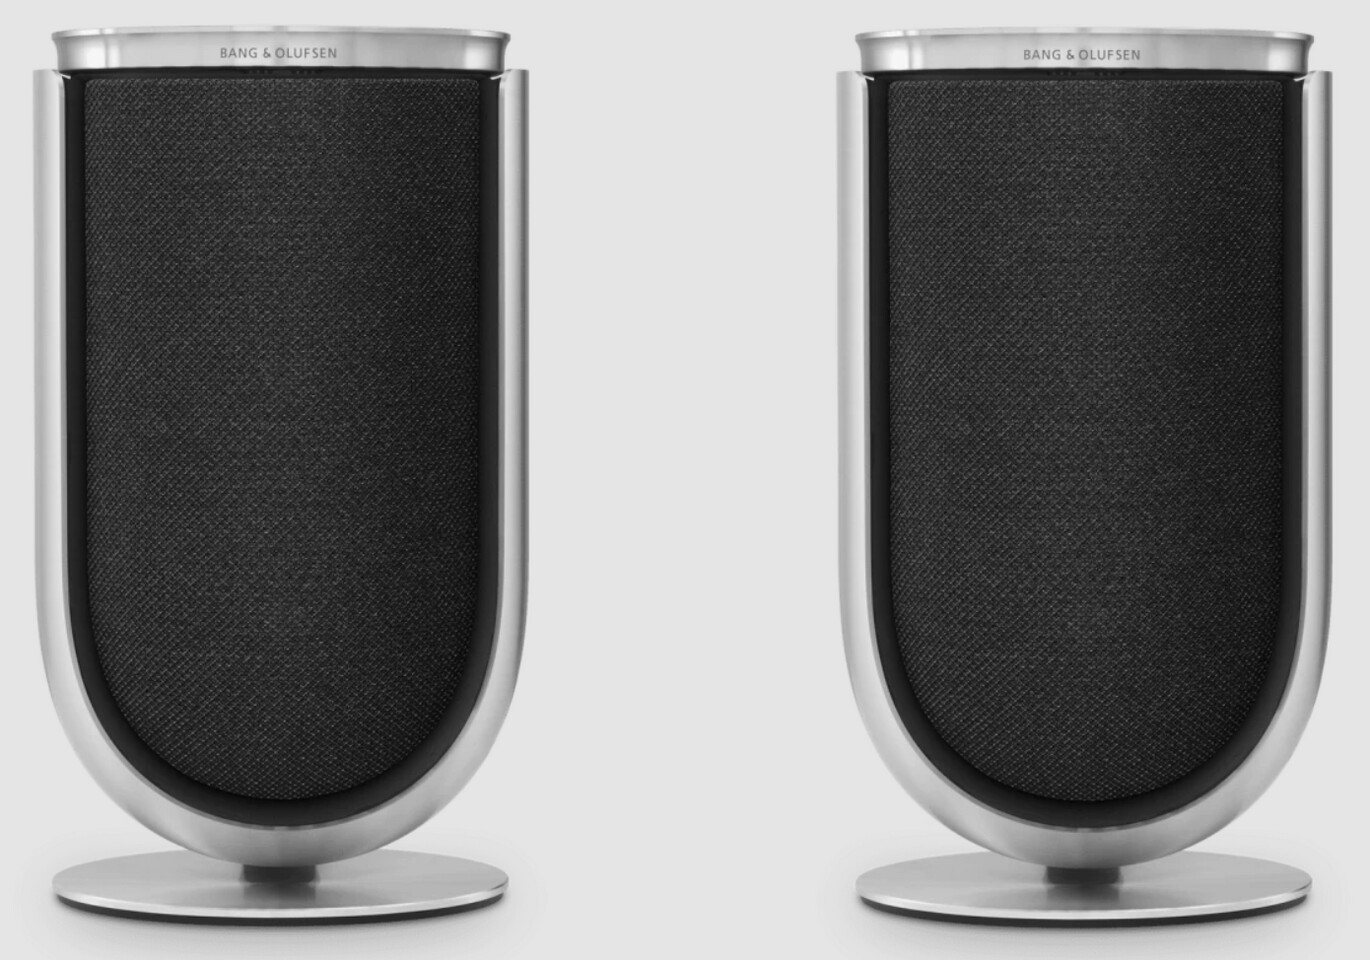 First Listen: Do Bang & Olufsen's Beolab 8 Speakers Sound $5,500 Good?